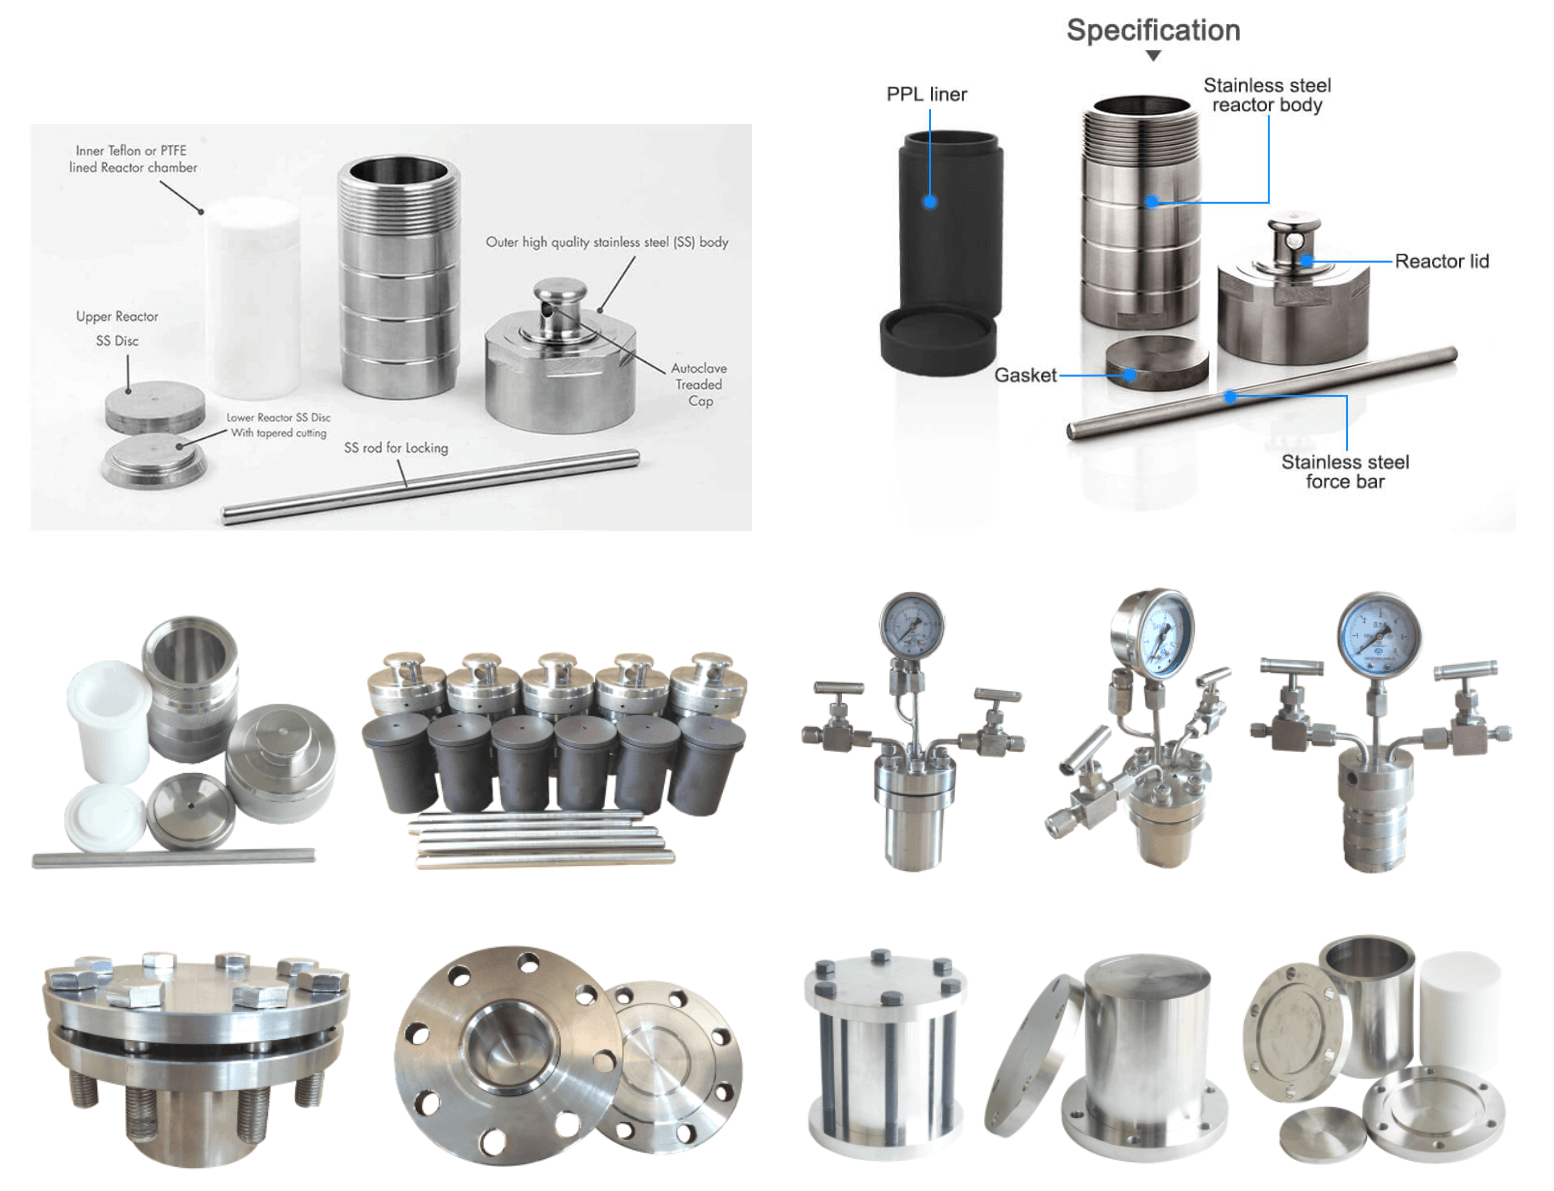 Lab Hydrothermal Synthesis Reactor With PPL Liner;